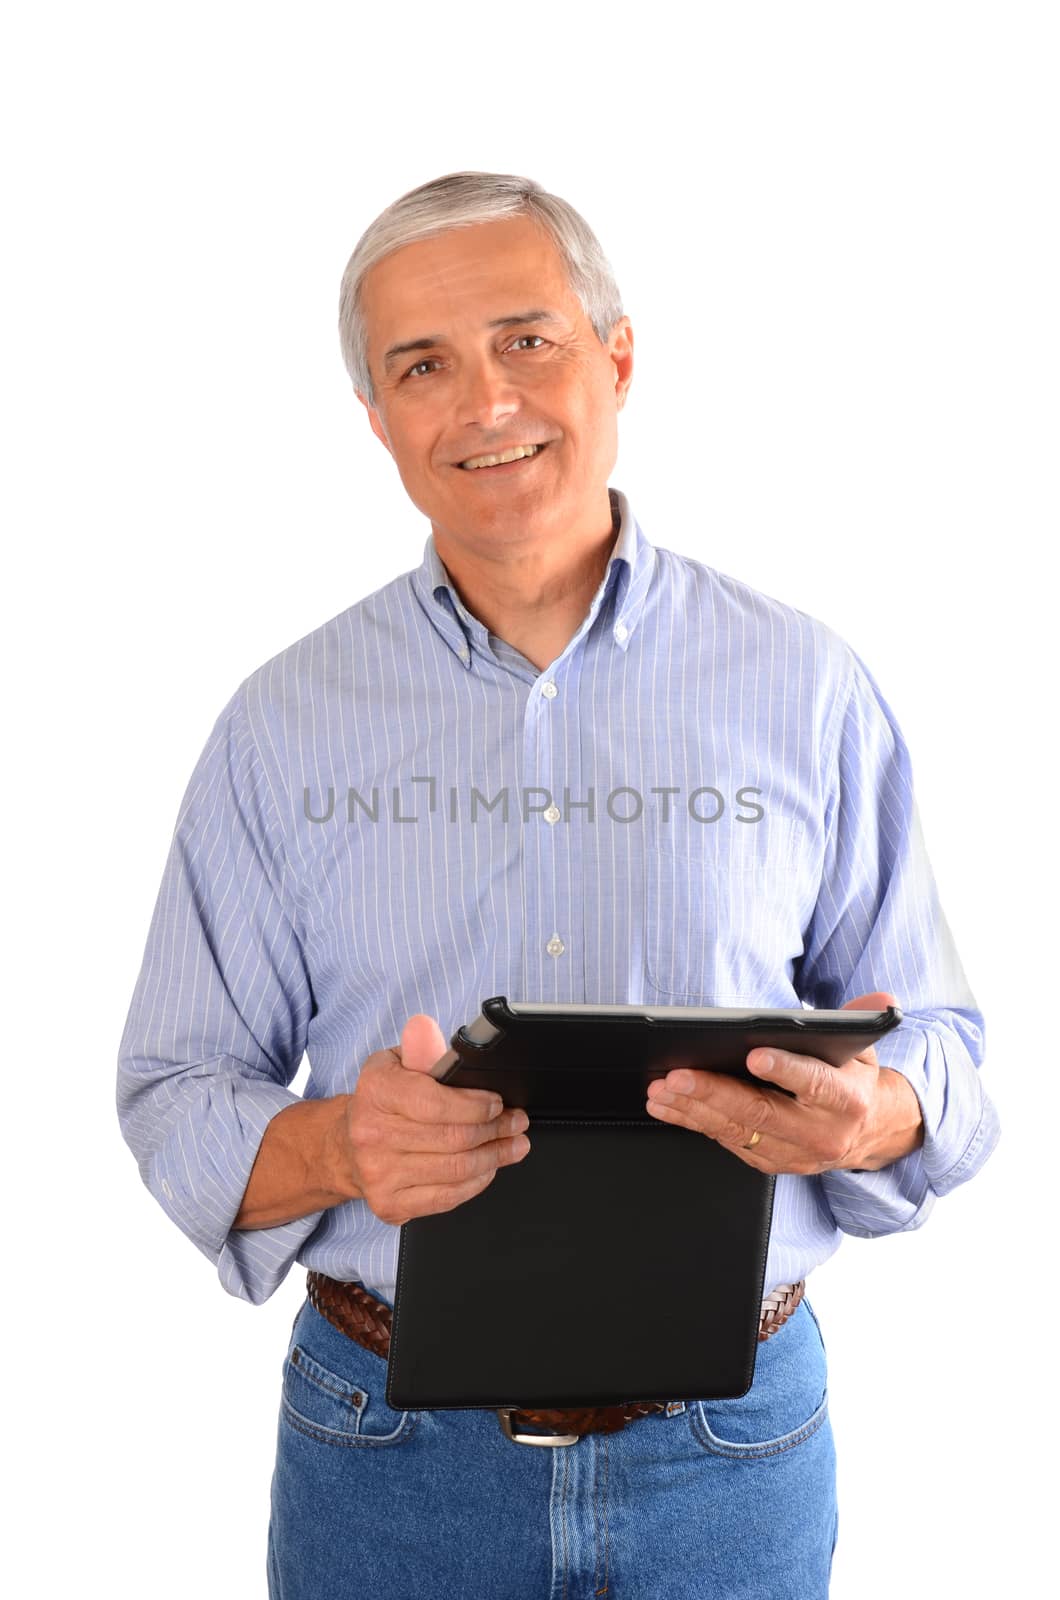 A casually dressed businessman holding a tablet computer in a case. Vertical composition over a white background.